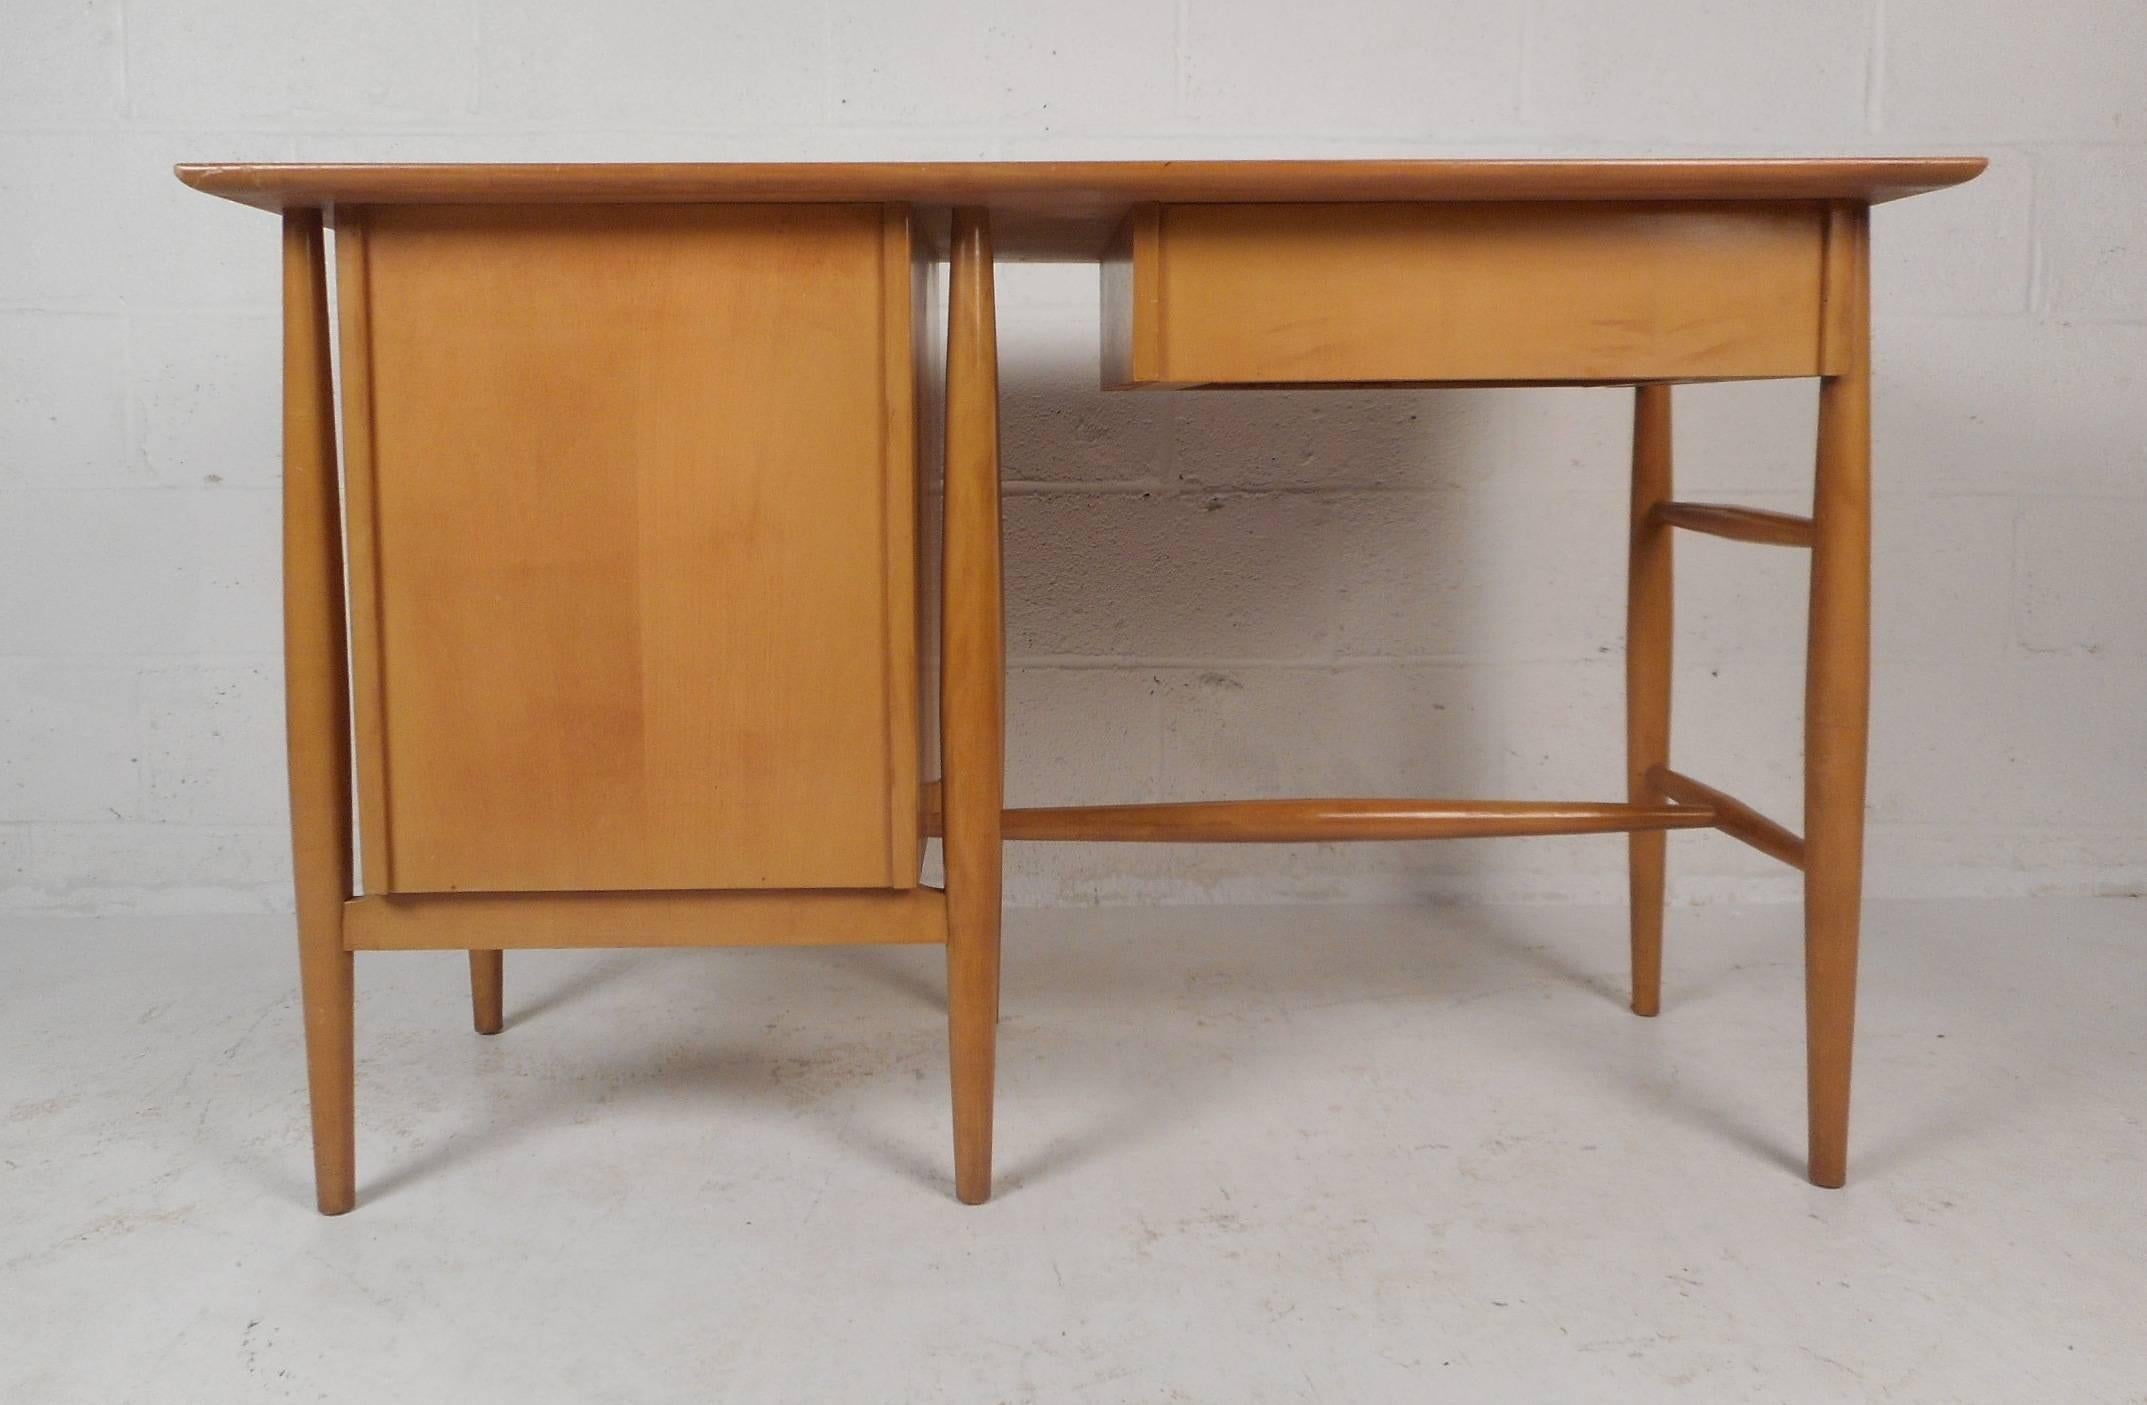 Maple Mid-Century Modern Desk and Chair by Paul McCobb